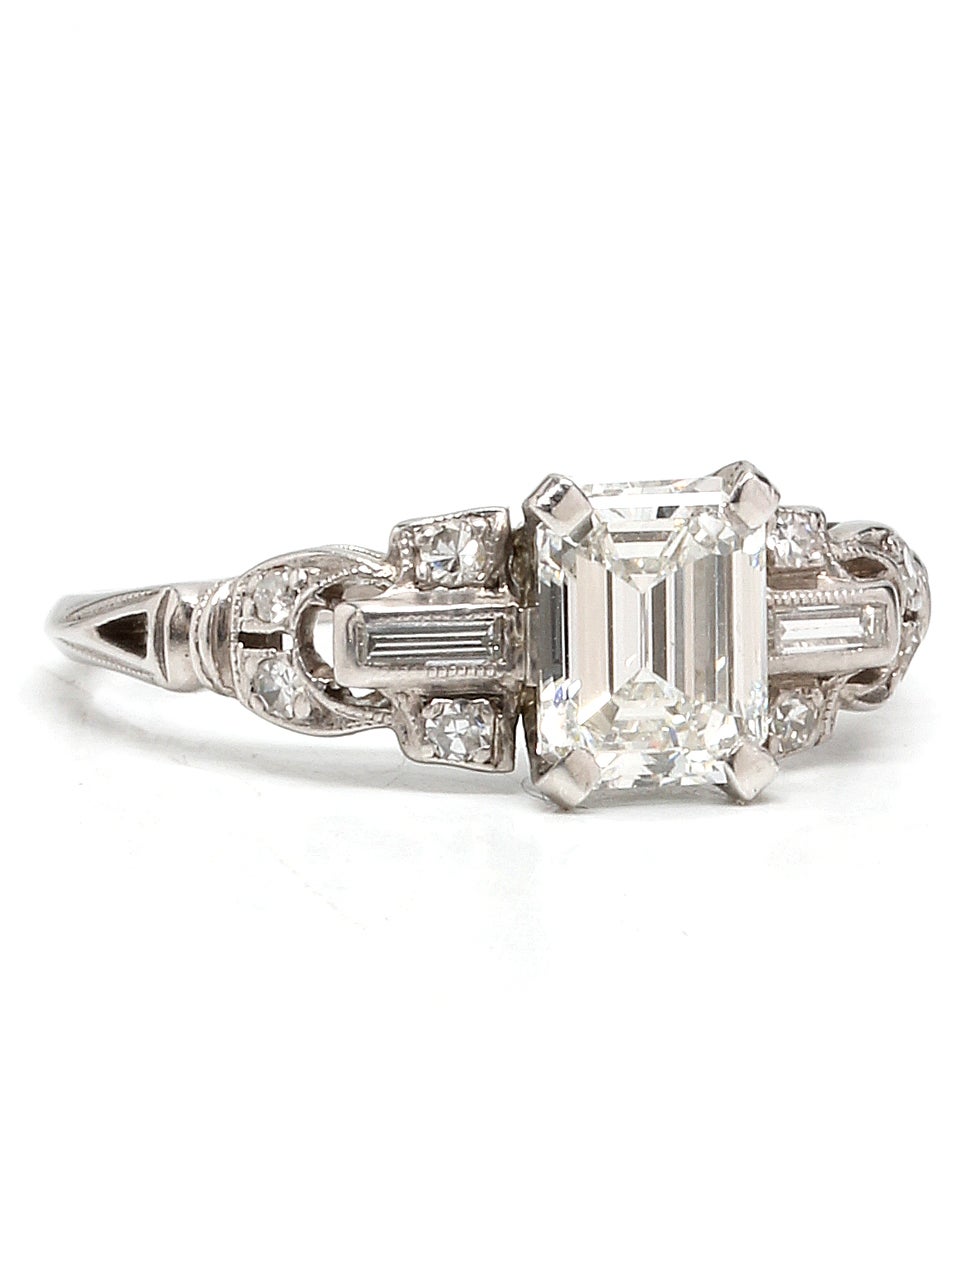 Striking platinum engagement ring. Featuring a 0.94 carat Emerald Cut diamond center stone, H color VS2 clarity. Each side is flanked with 4 round and 1 straight baguette accent diamonds adding approximately 0.17 carat. 
Size 6 Circa 1930's
EGL US